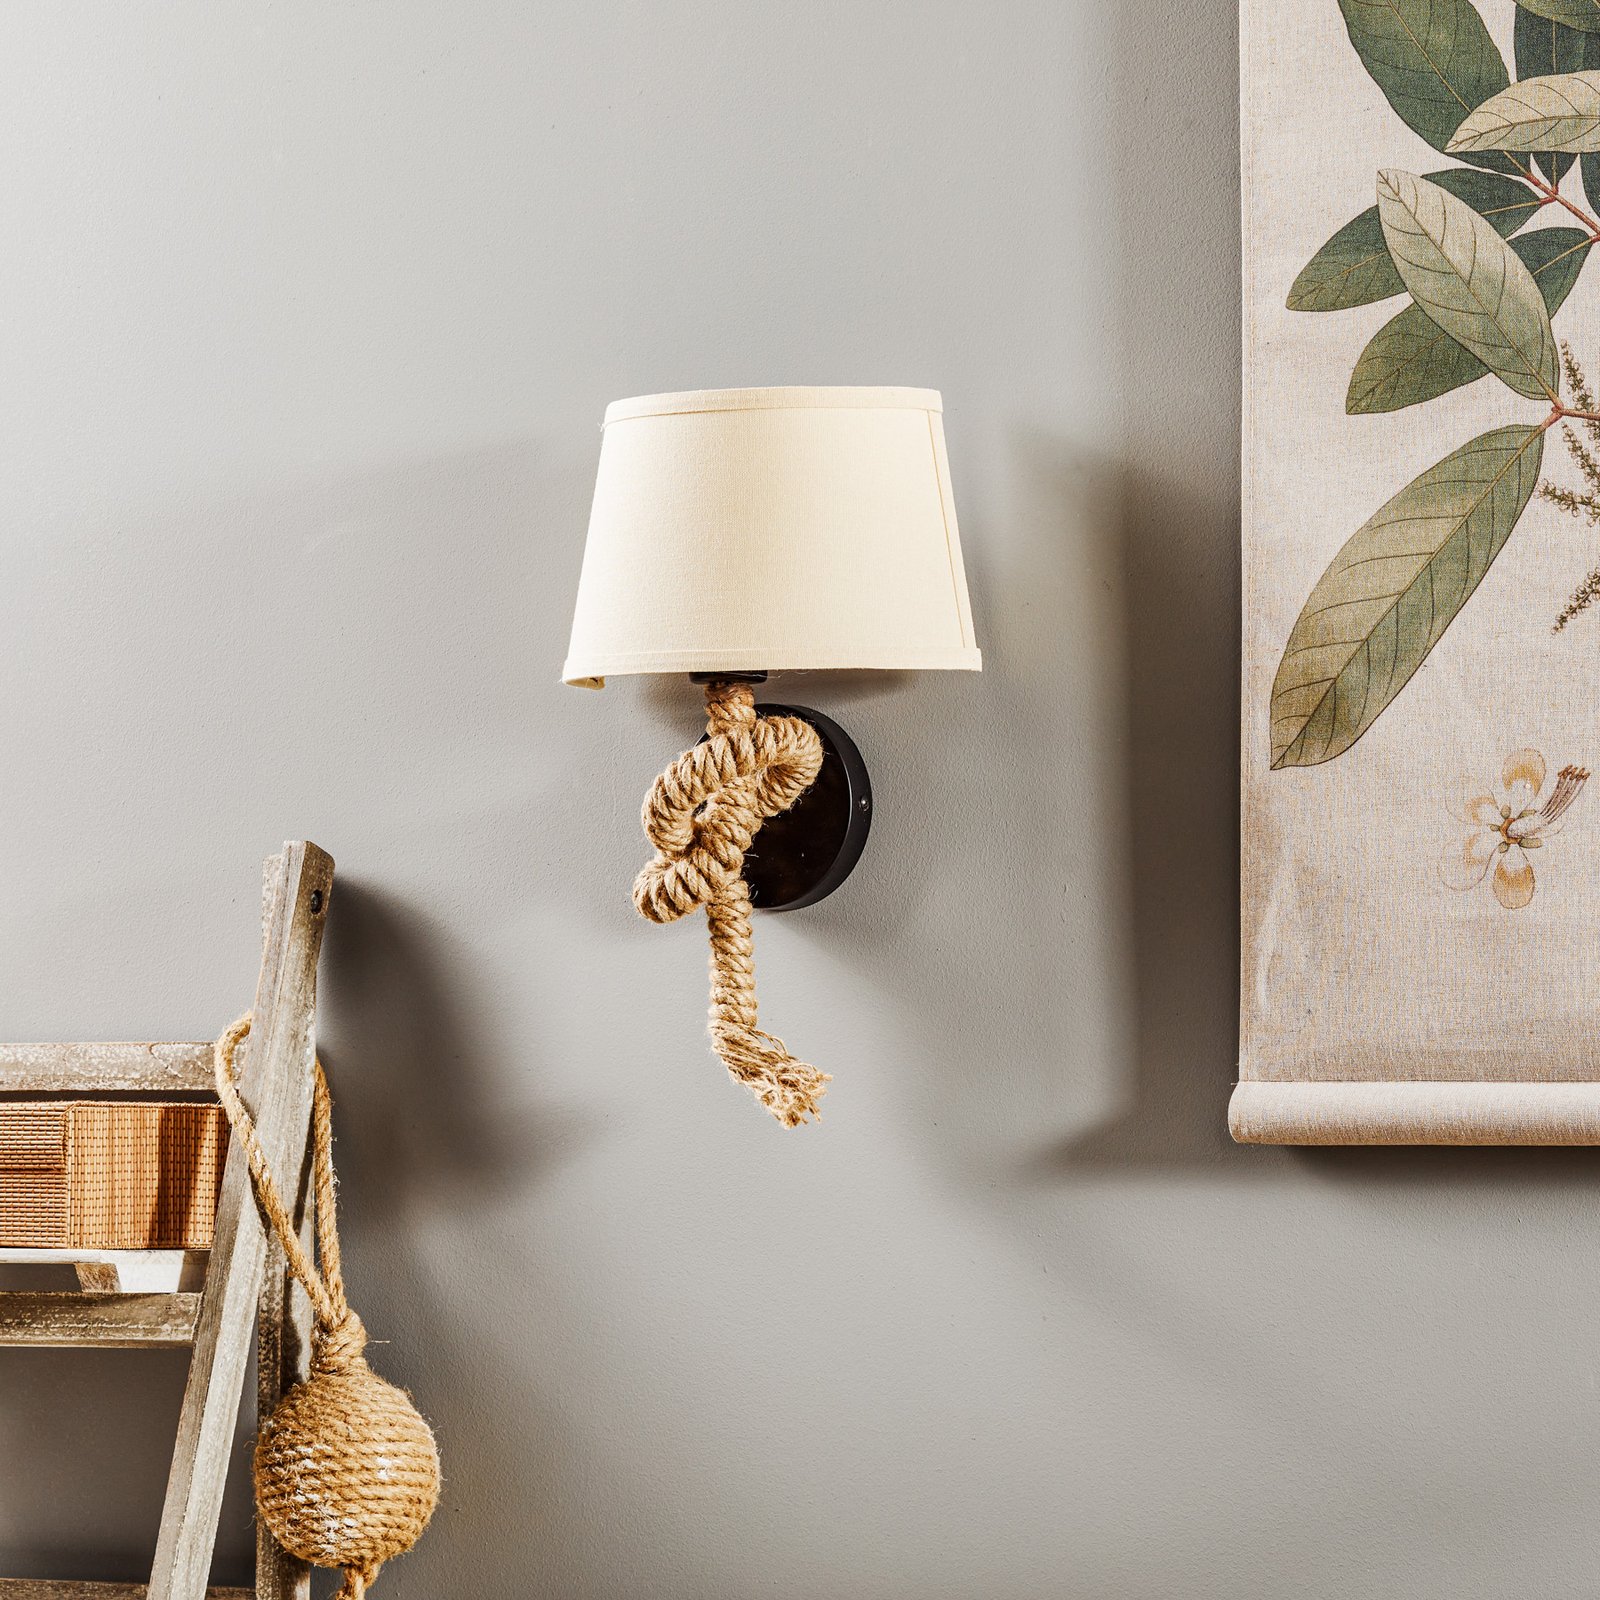 Corda wall lamp with textile shade and rope decoration